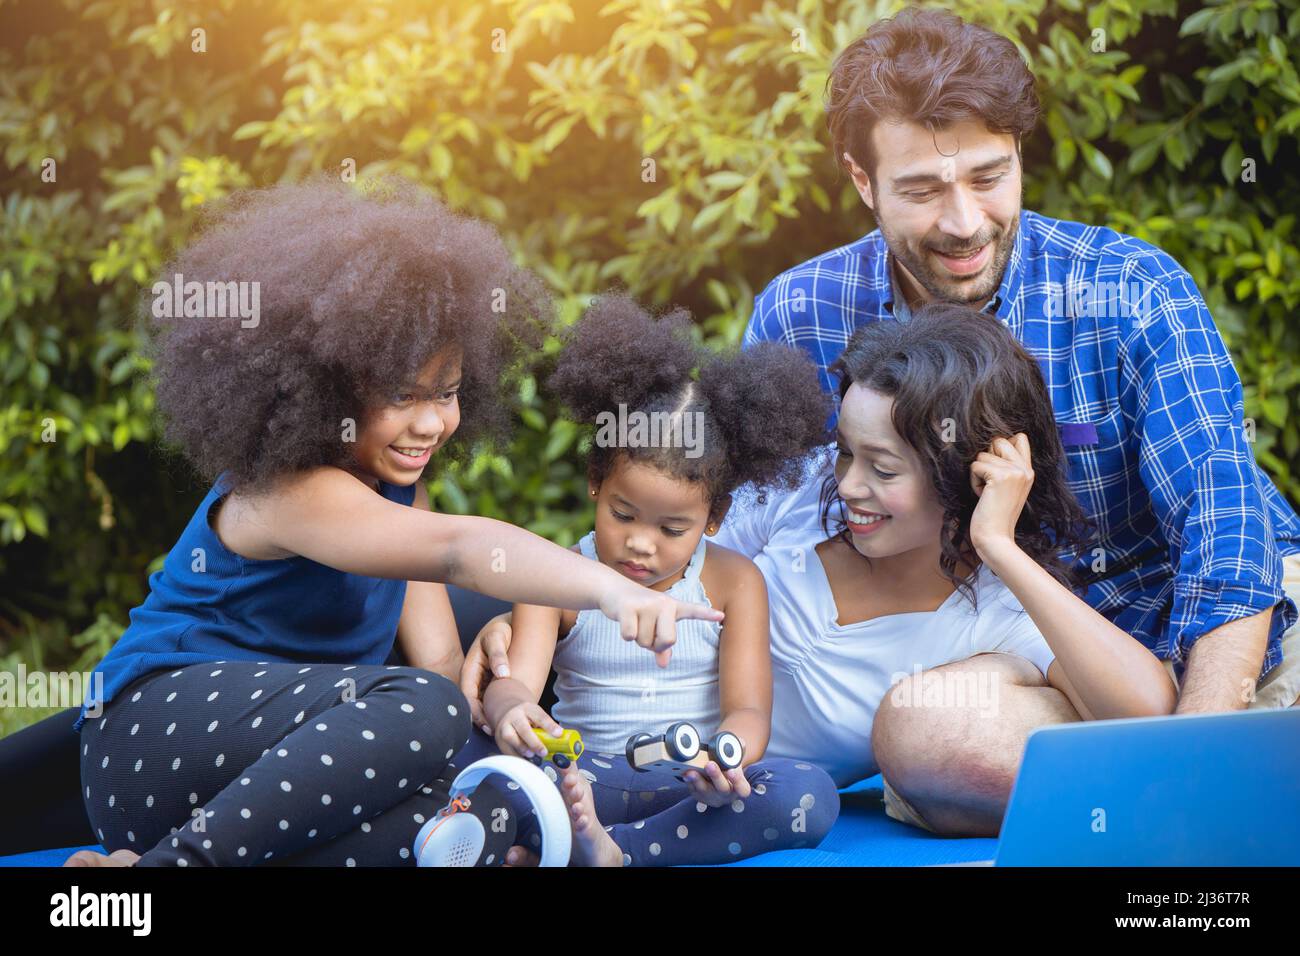 Family happy playing enjoy picnic together in the park garden home backyard  Stock Photo - Alamy